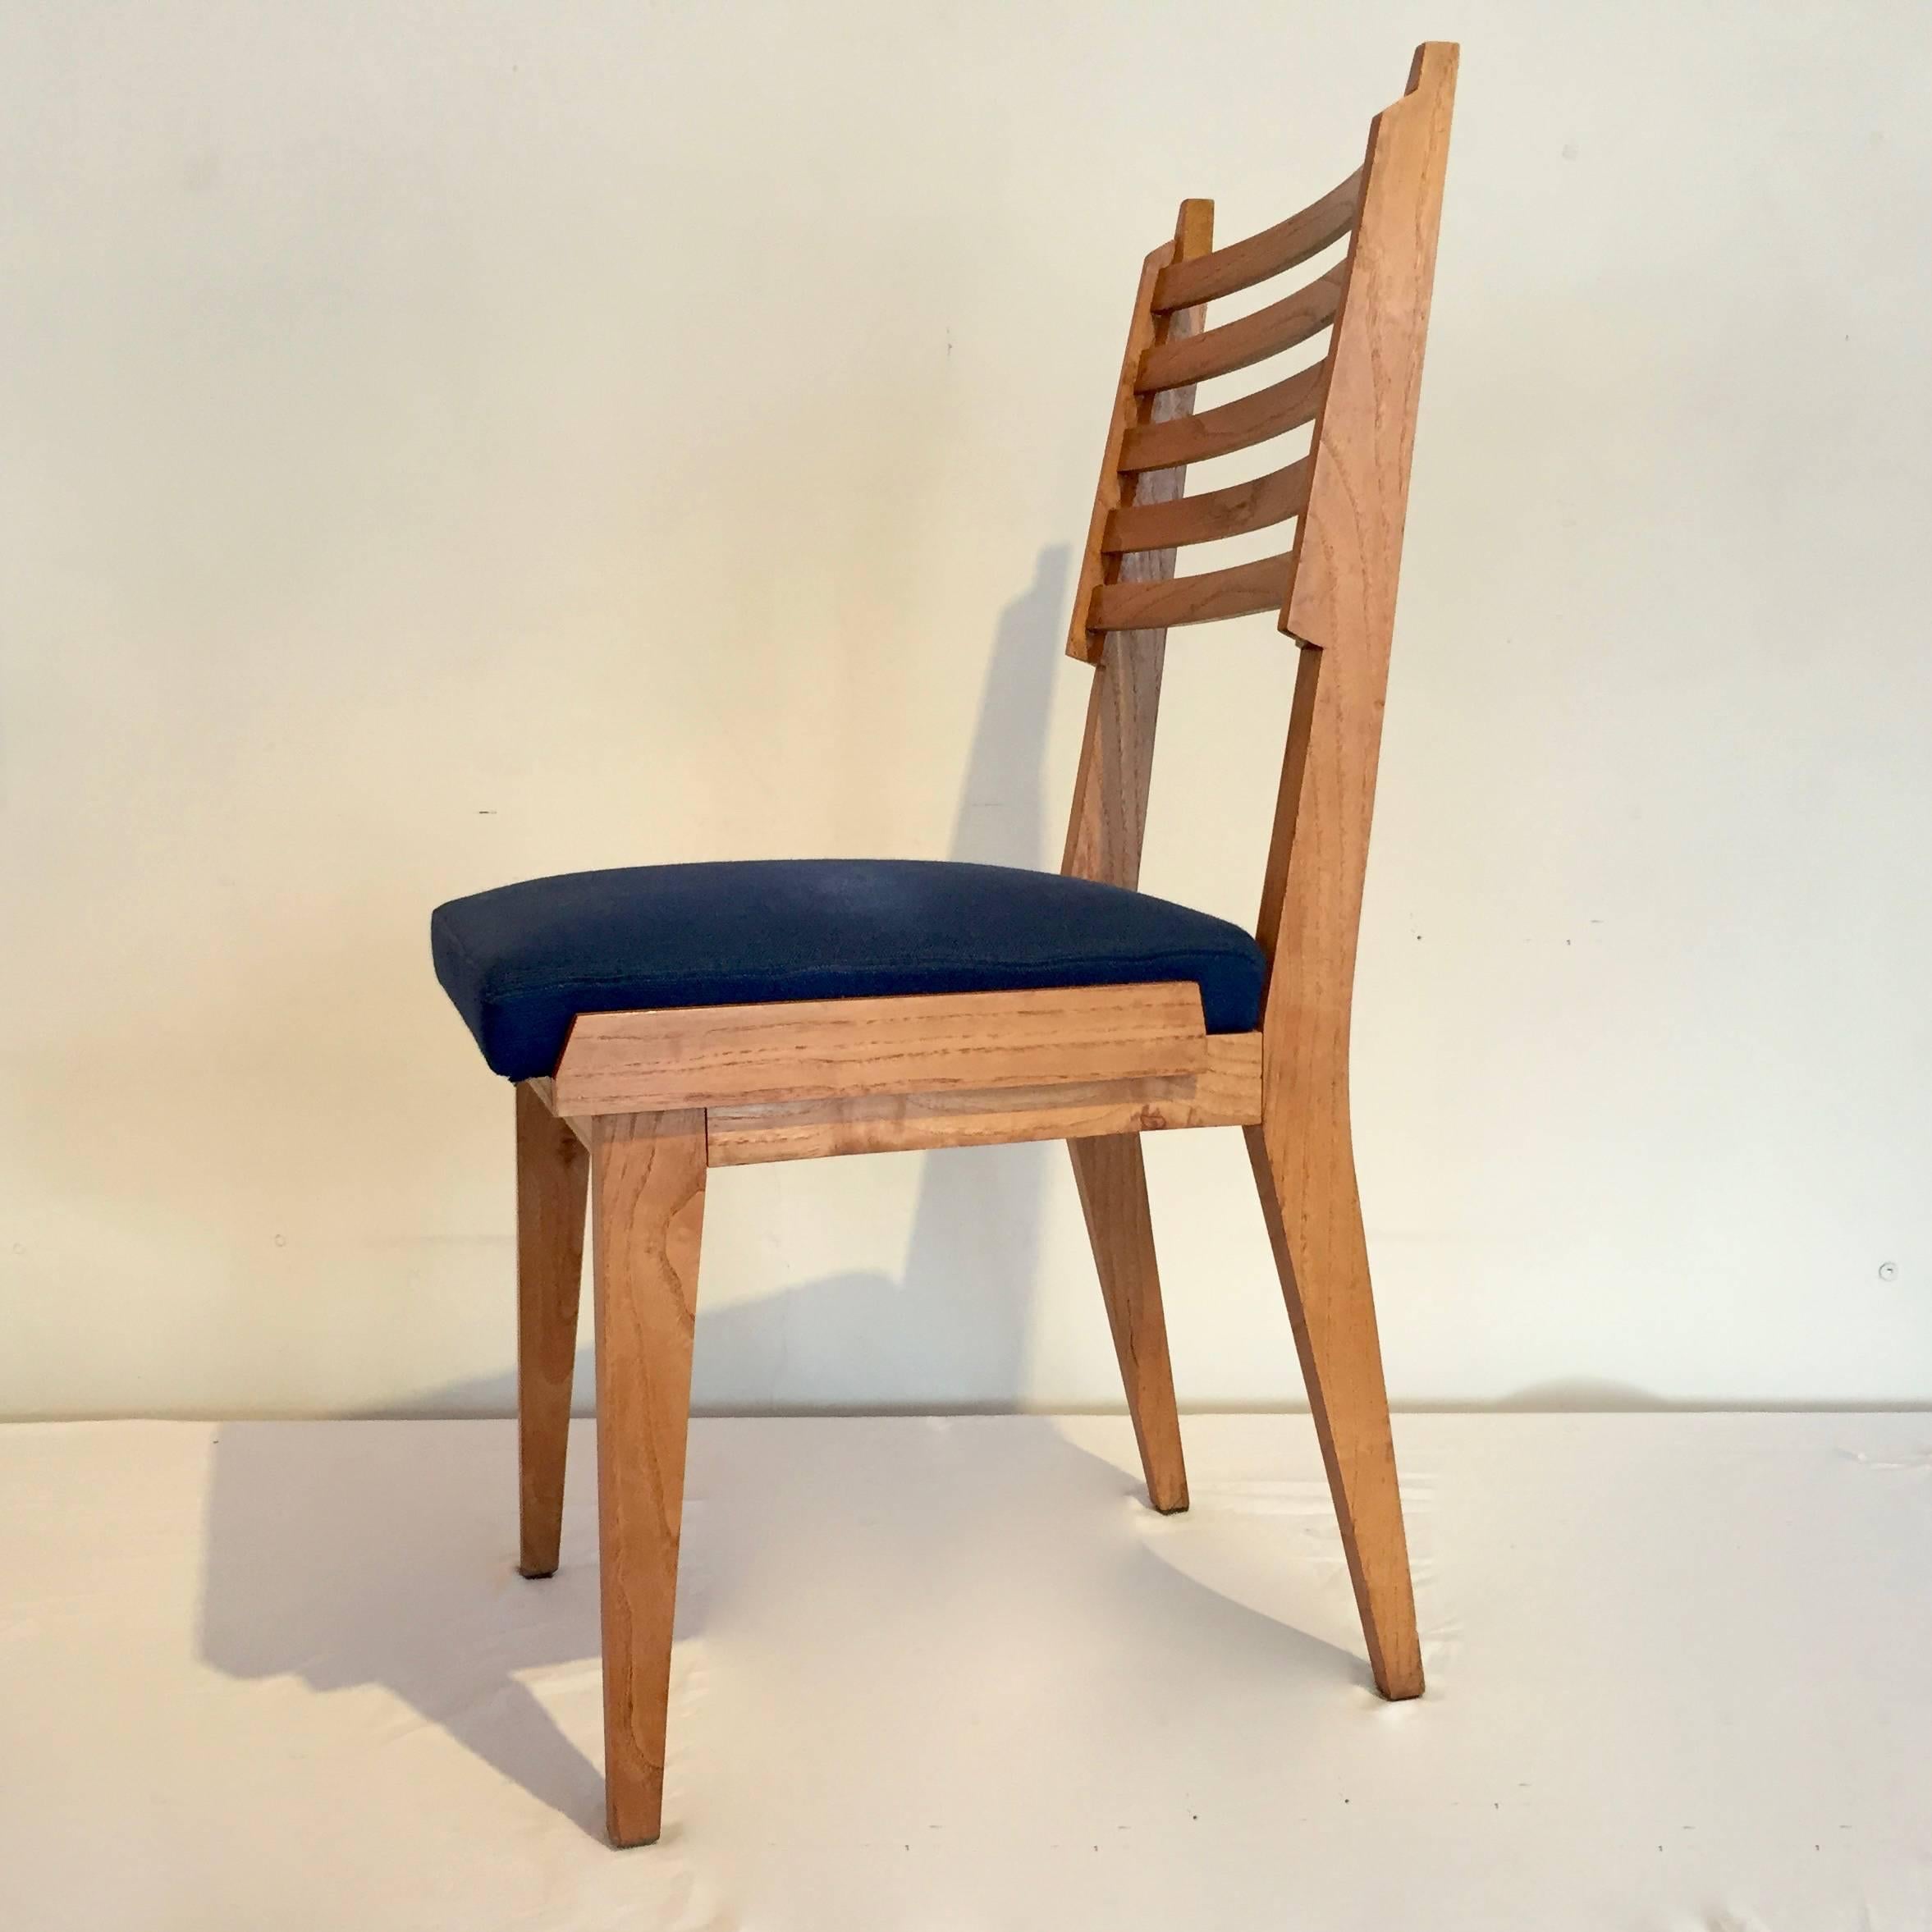 Four vintage wooden  Italian dining chairs, very similar to some of Ico Parisi's work, a smart and well designed modernist set.